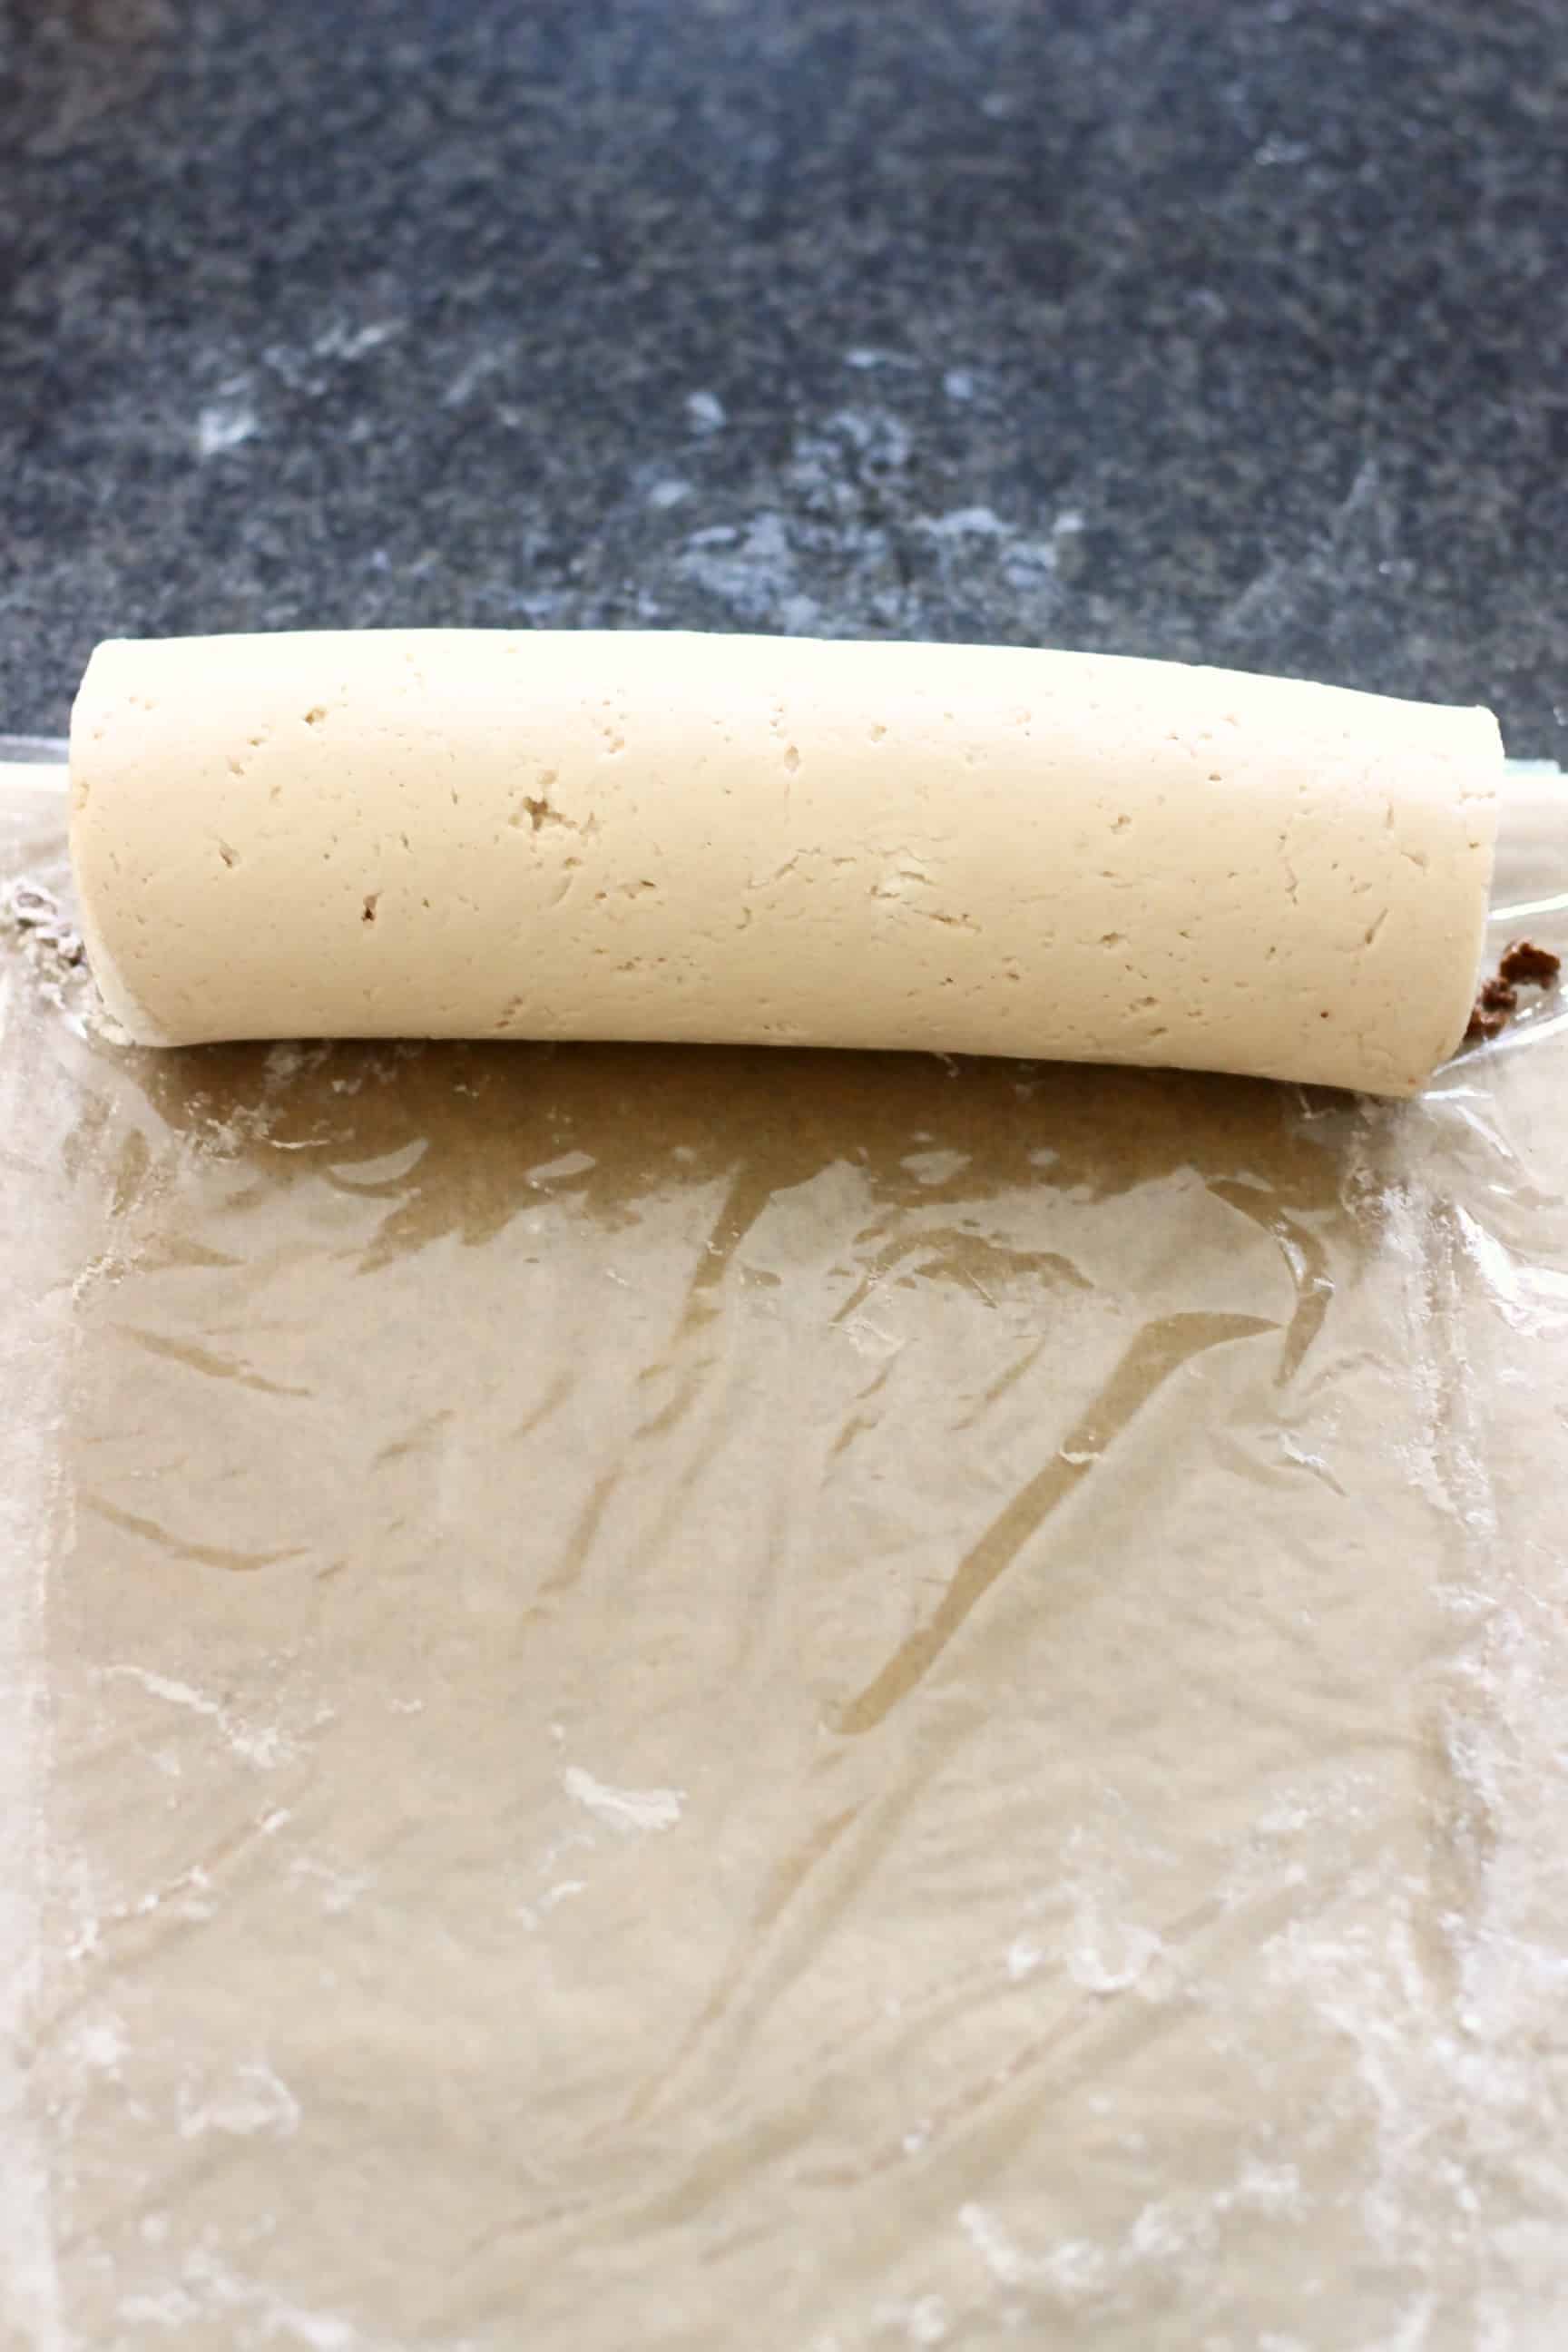 Gluten-free vegan cinnamon roll dough filled with cinnamon sugar rolled into a sausage shape on a piece of cling film on baking paper